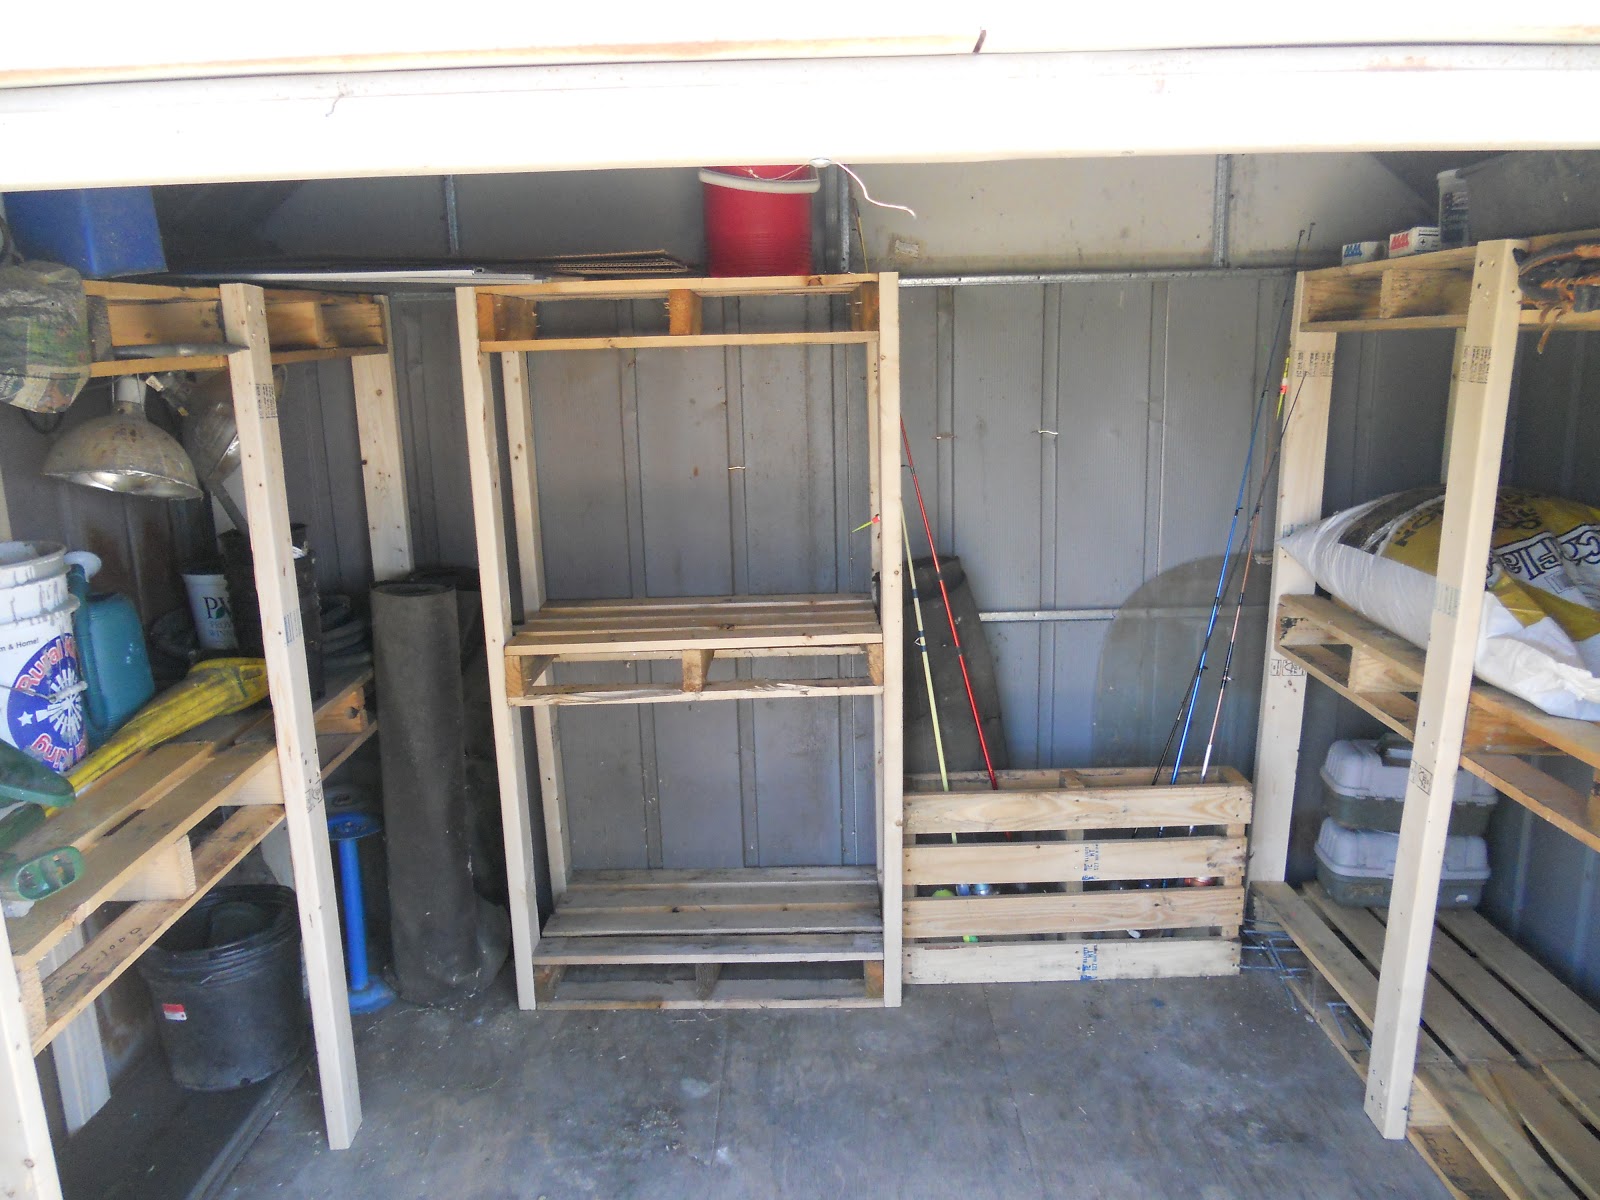 pallet palace: storage shed organization system from